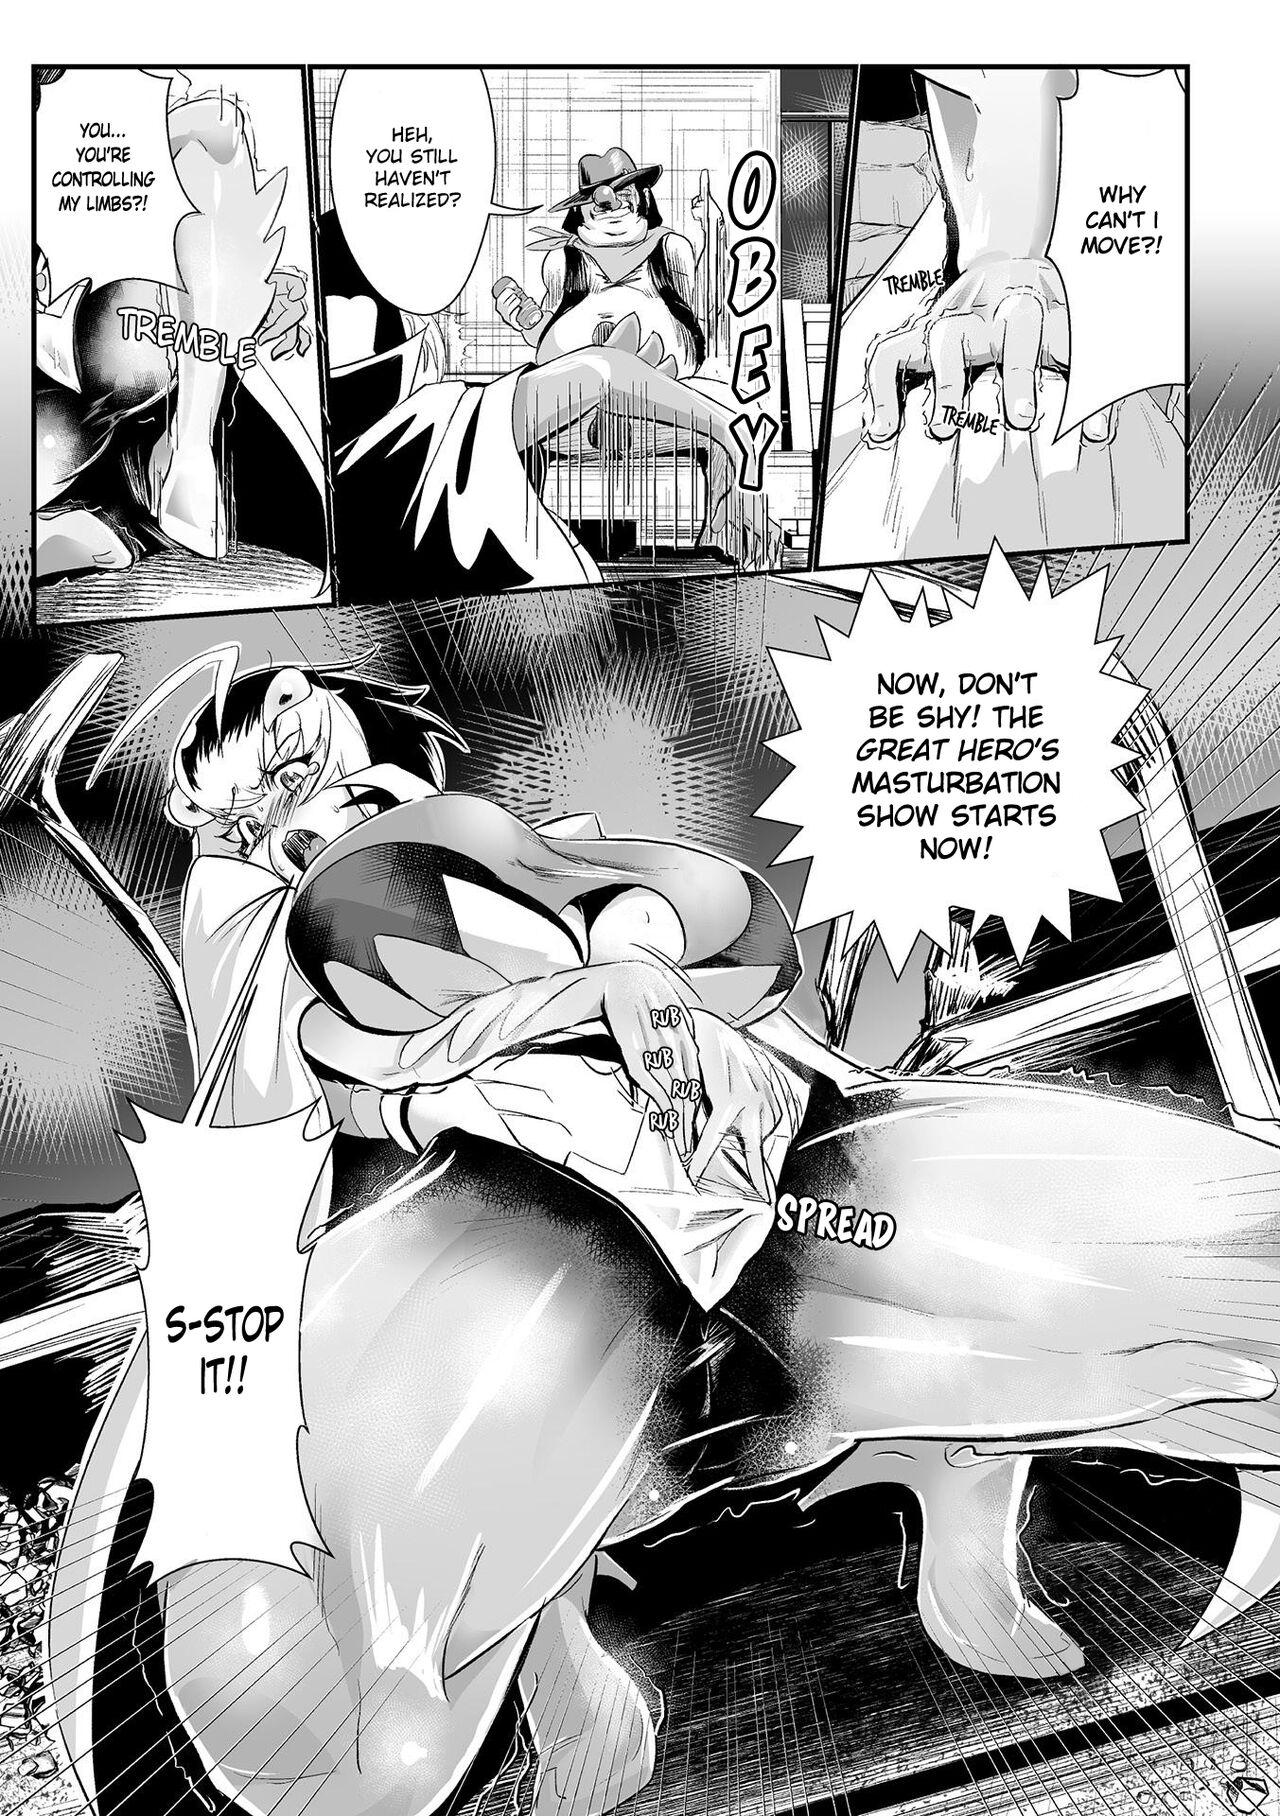 Alone Lady Global Hawk VS Hatter, The 10 Gallons Macho - Page 6